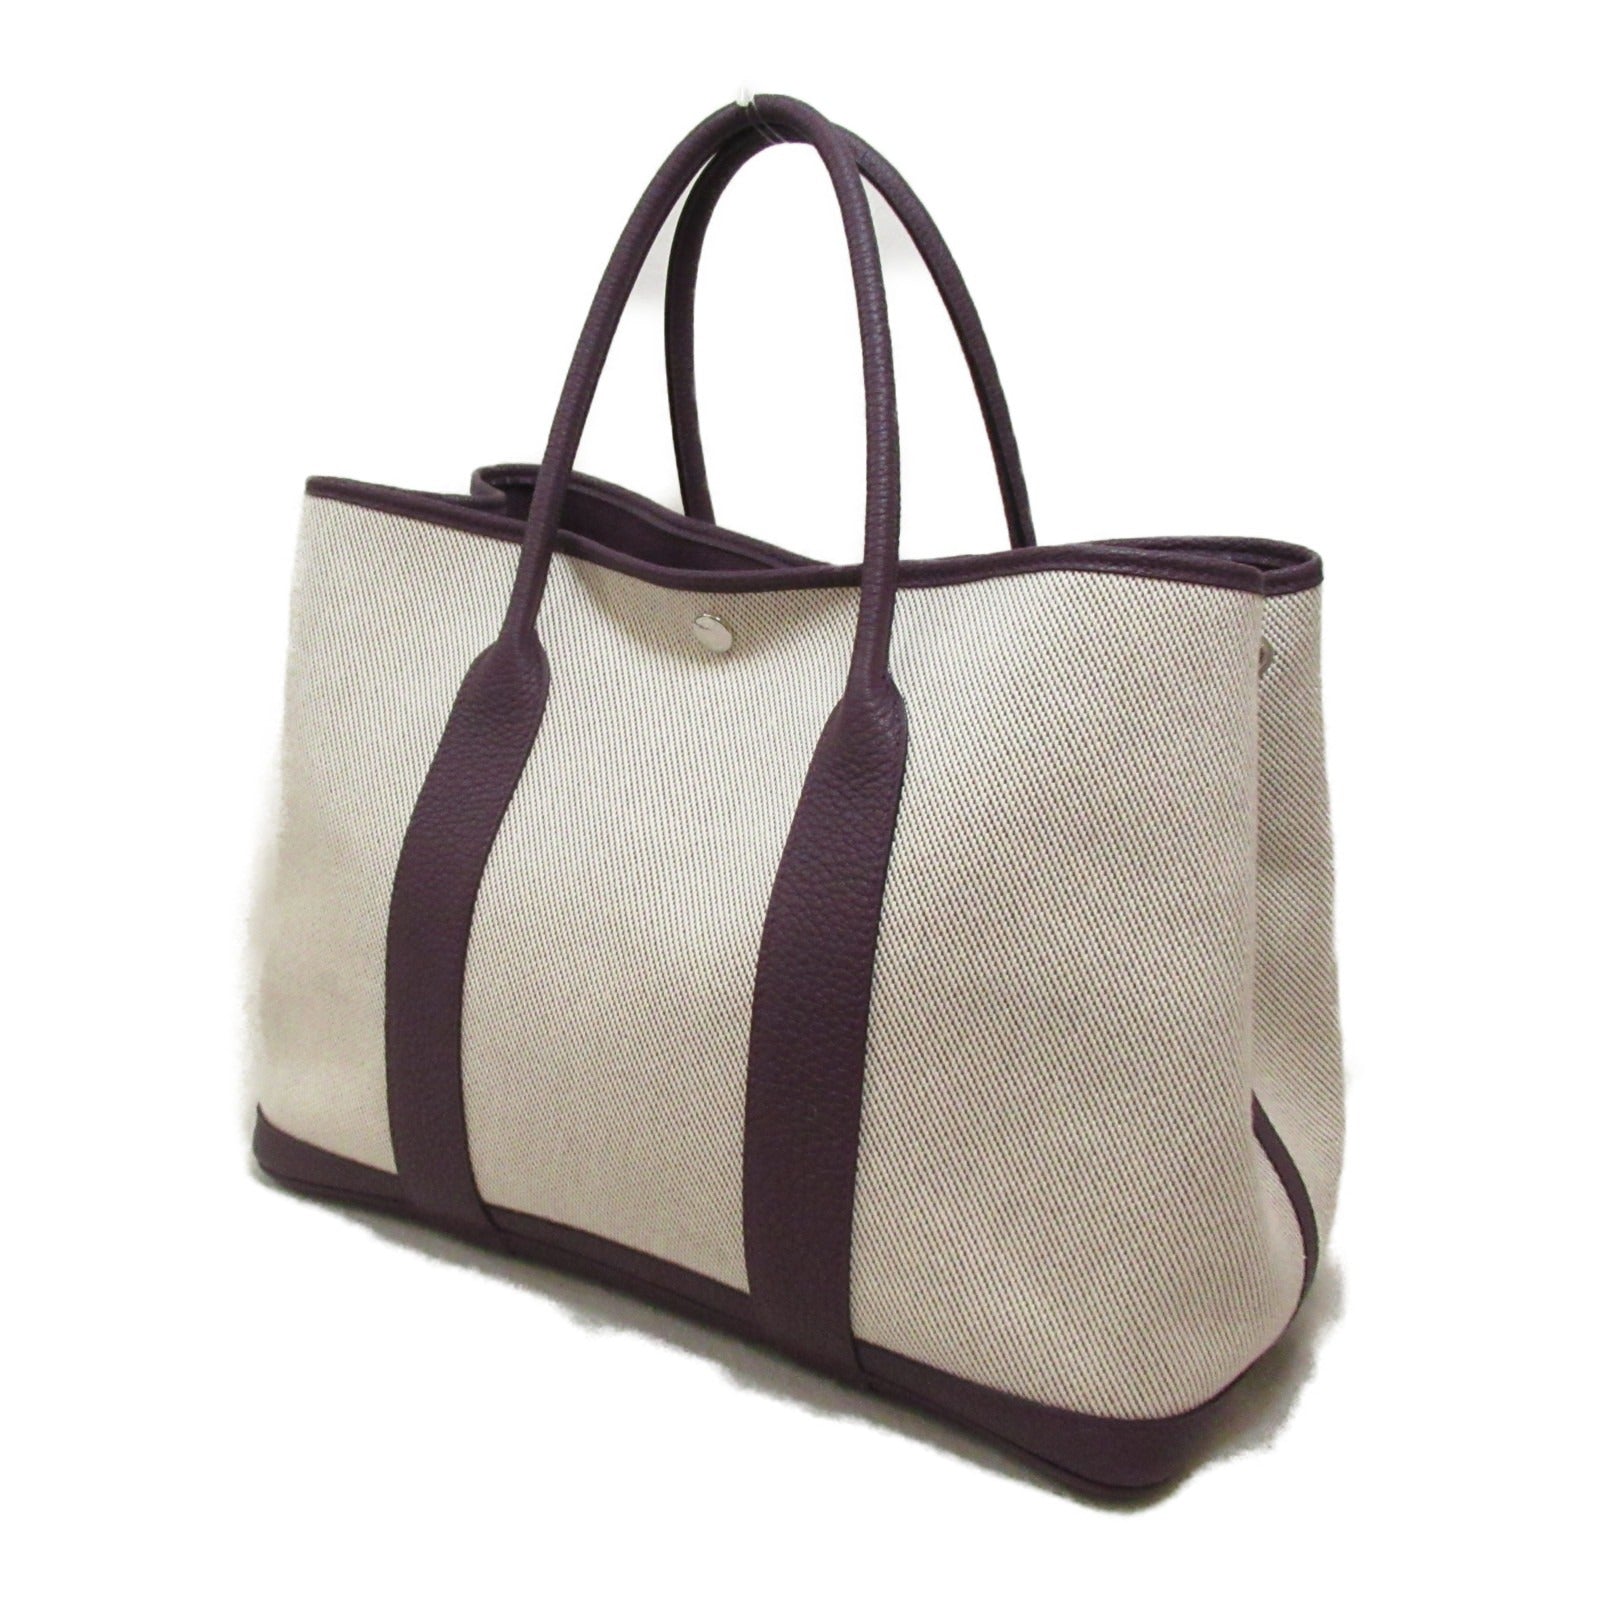 Hermes Hermes Garden Party PM Cassis Tote Bag  Bag Leather Fabric Negonda Towerash  Pearl Casey